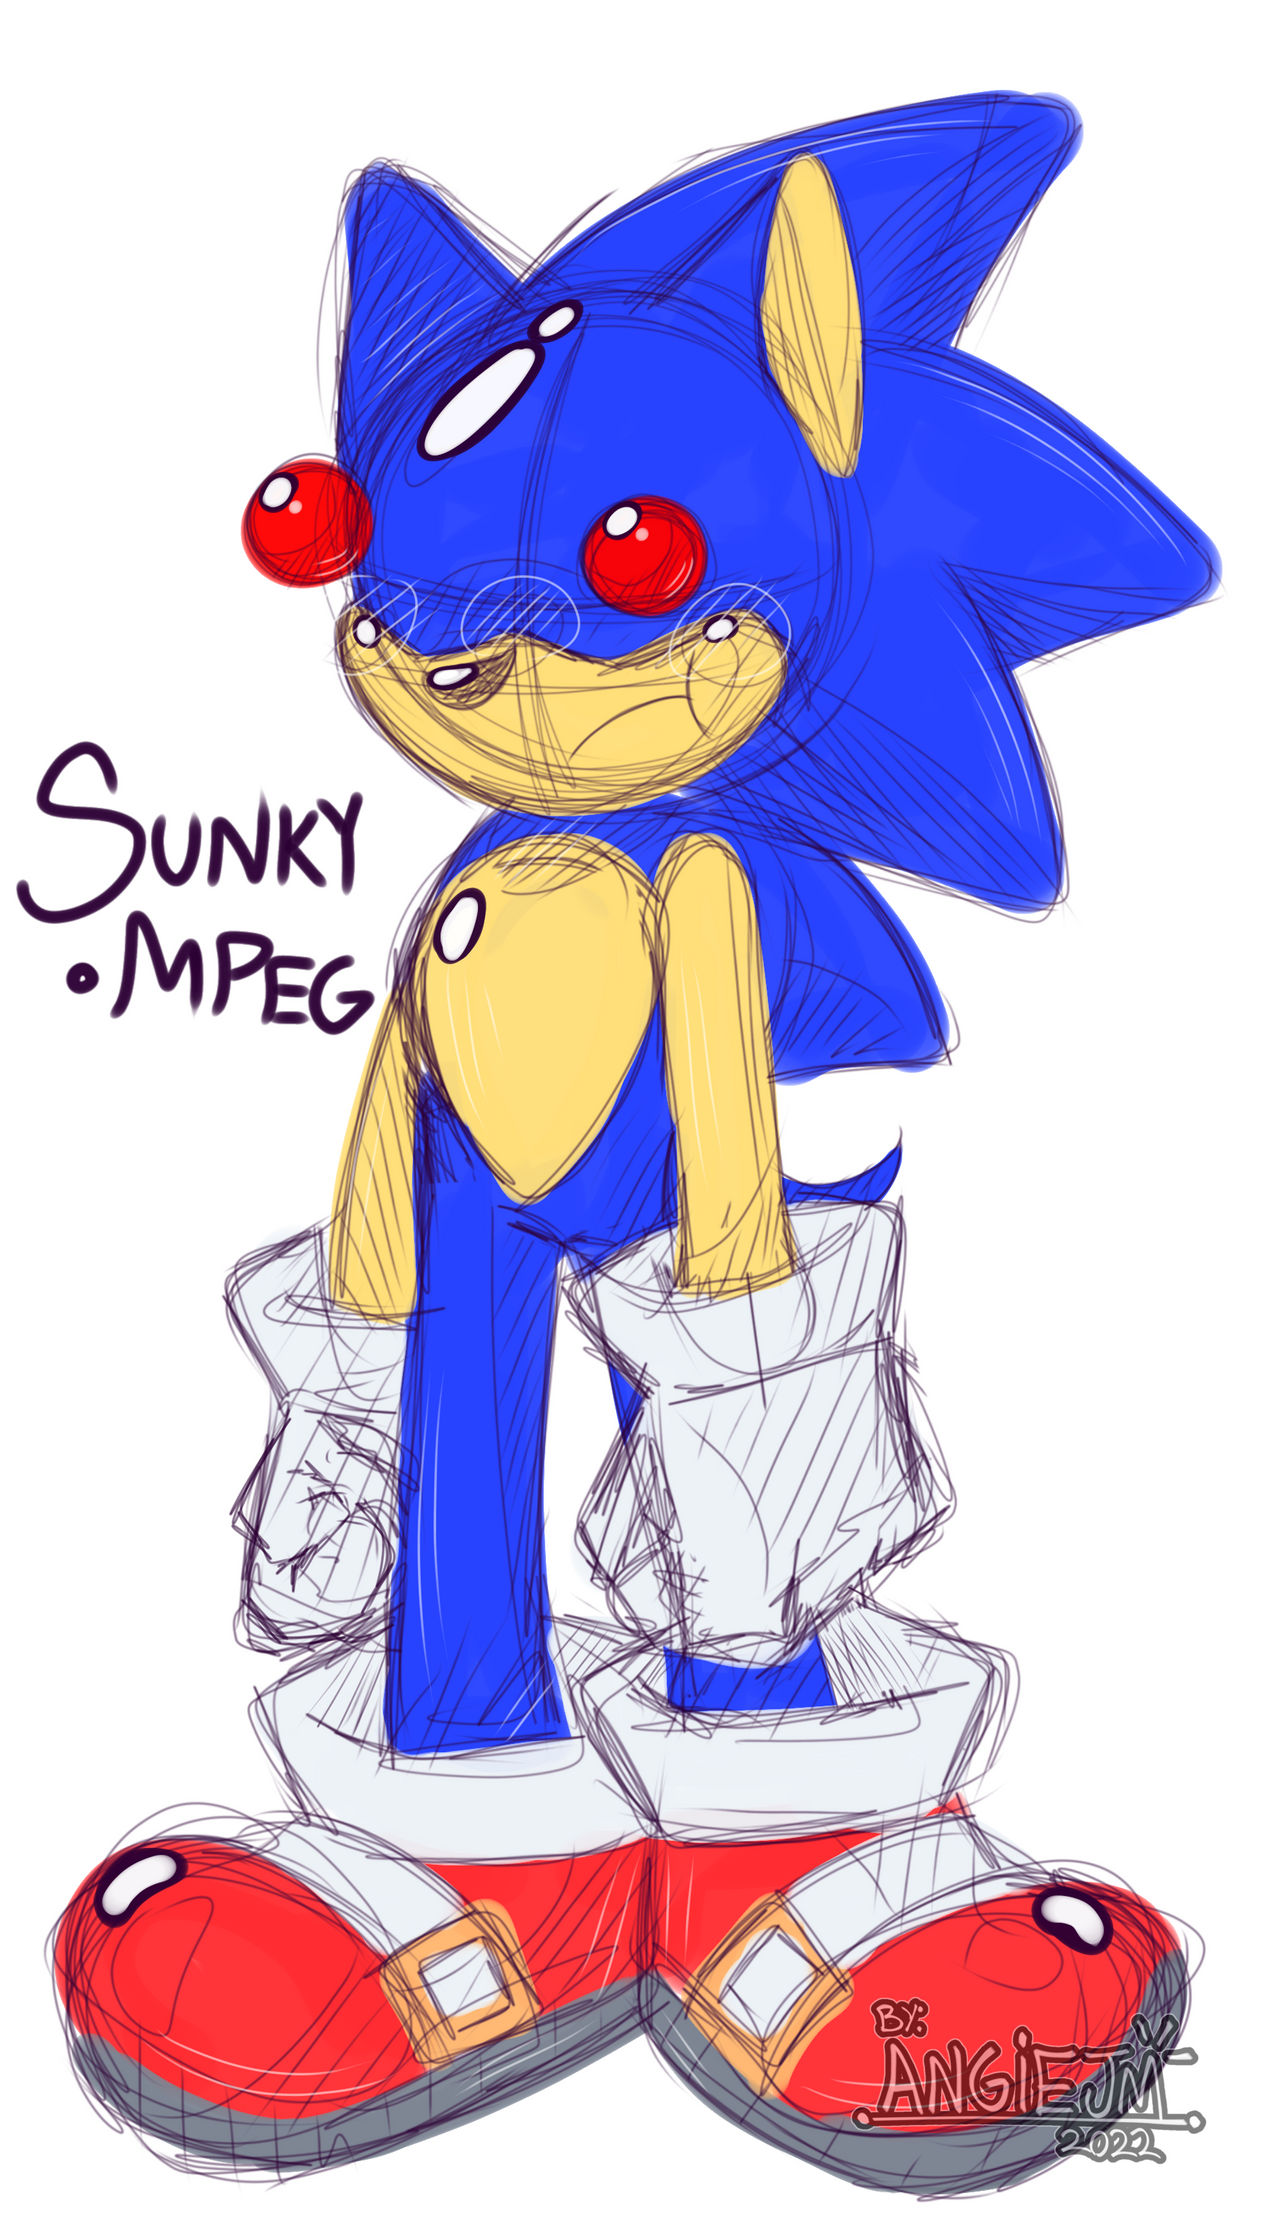 Sunky.Mpeg by TheArtiest175 on DeviantArt